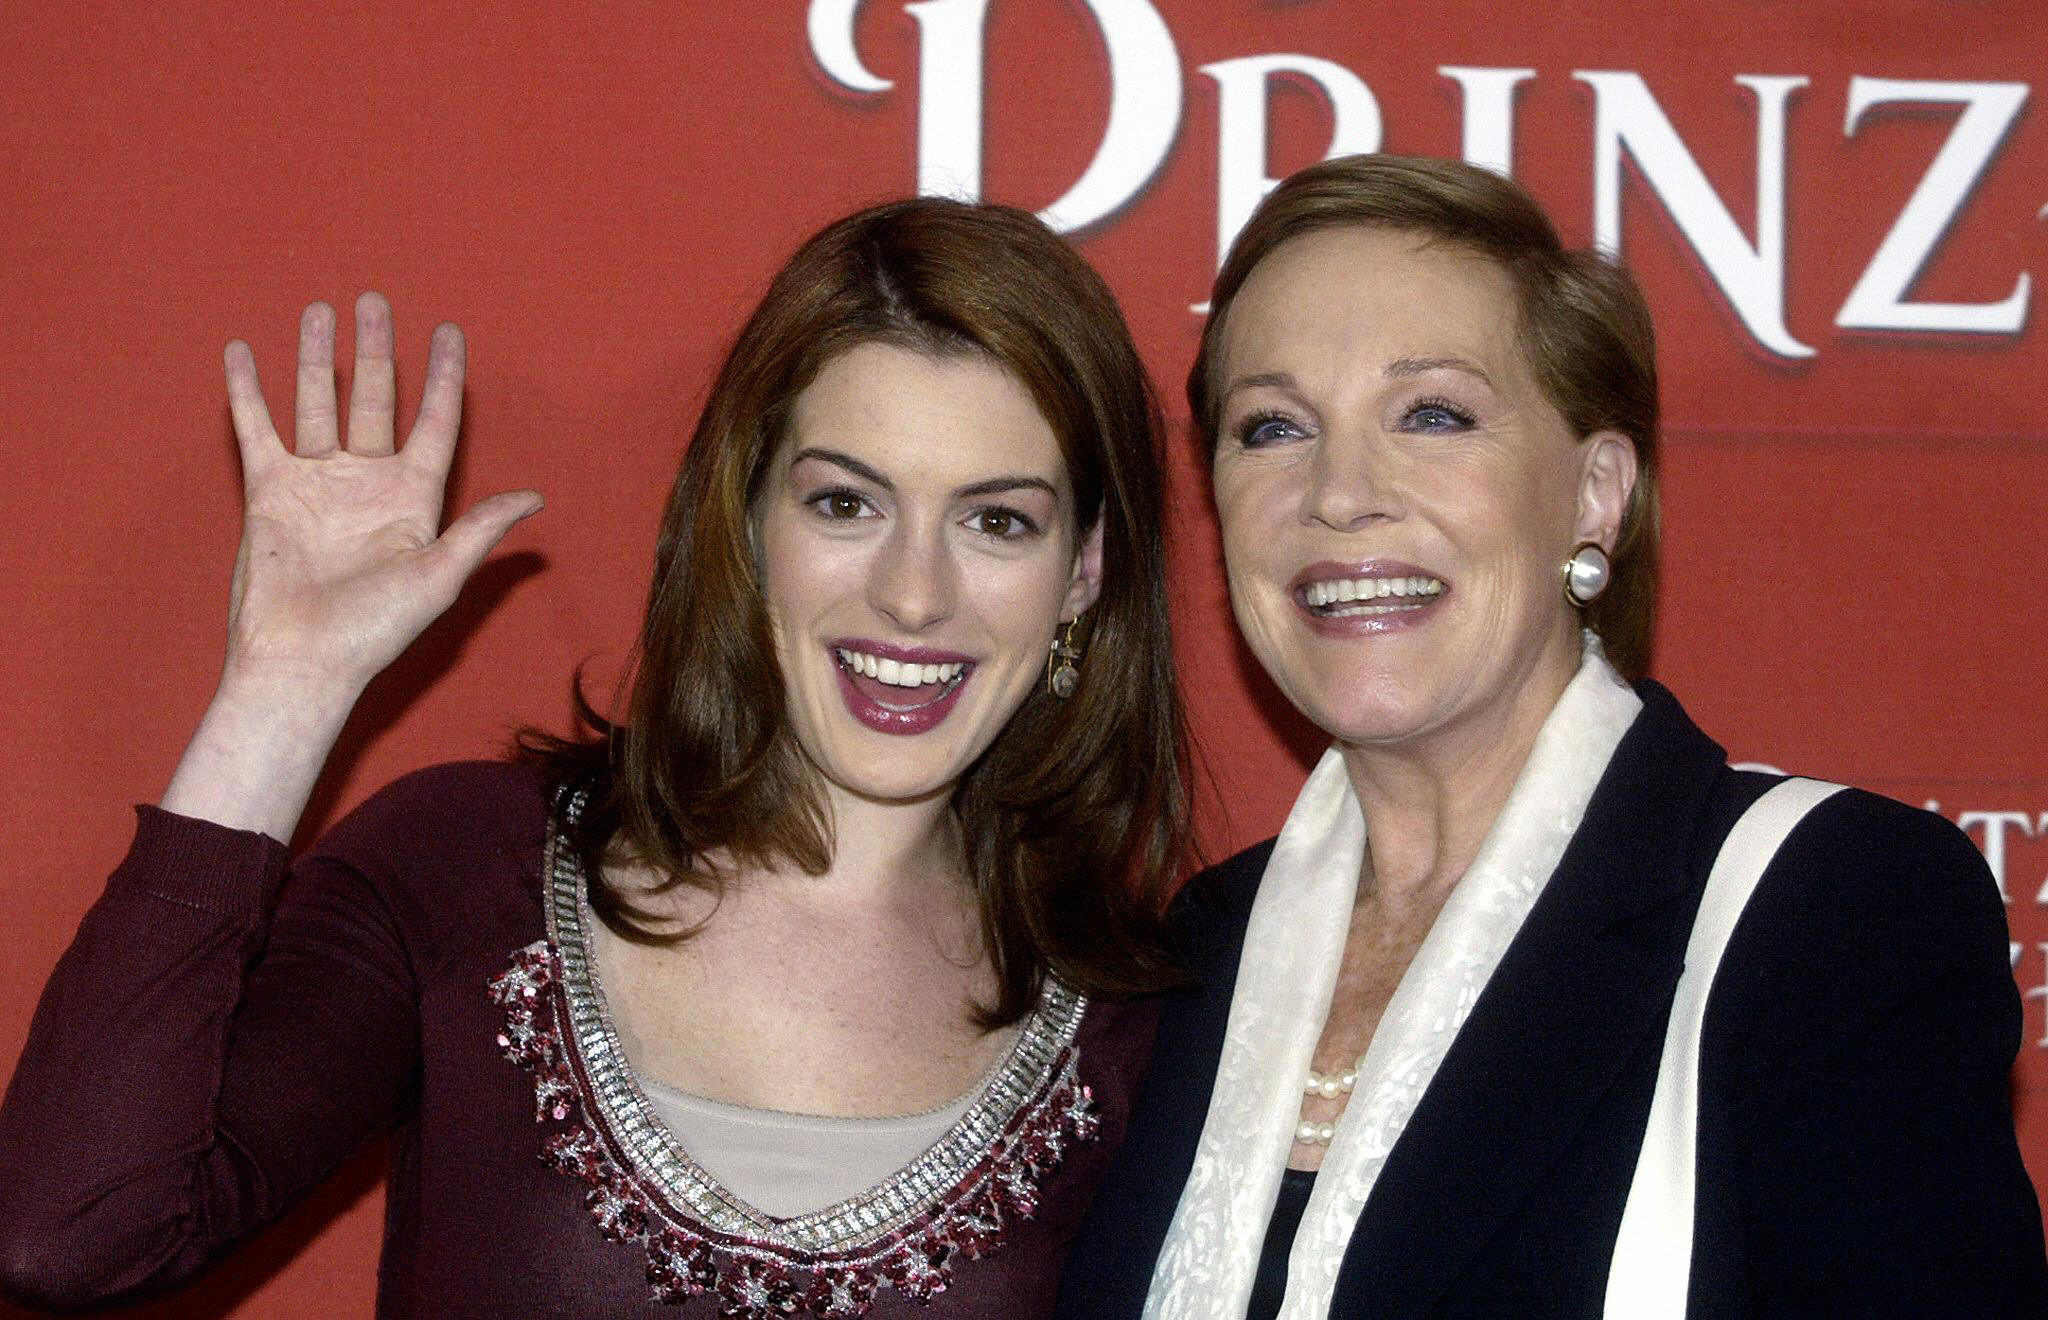 anne waving and standing next to julie andrews